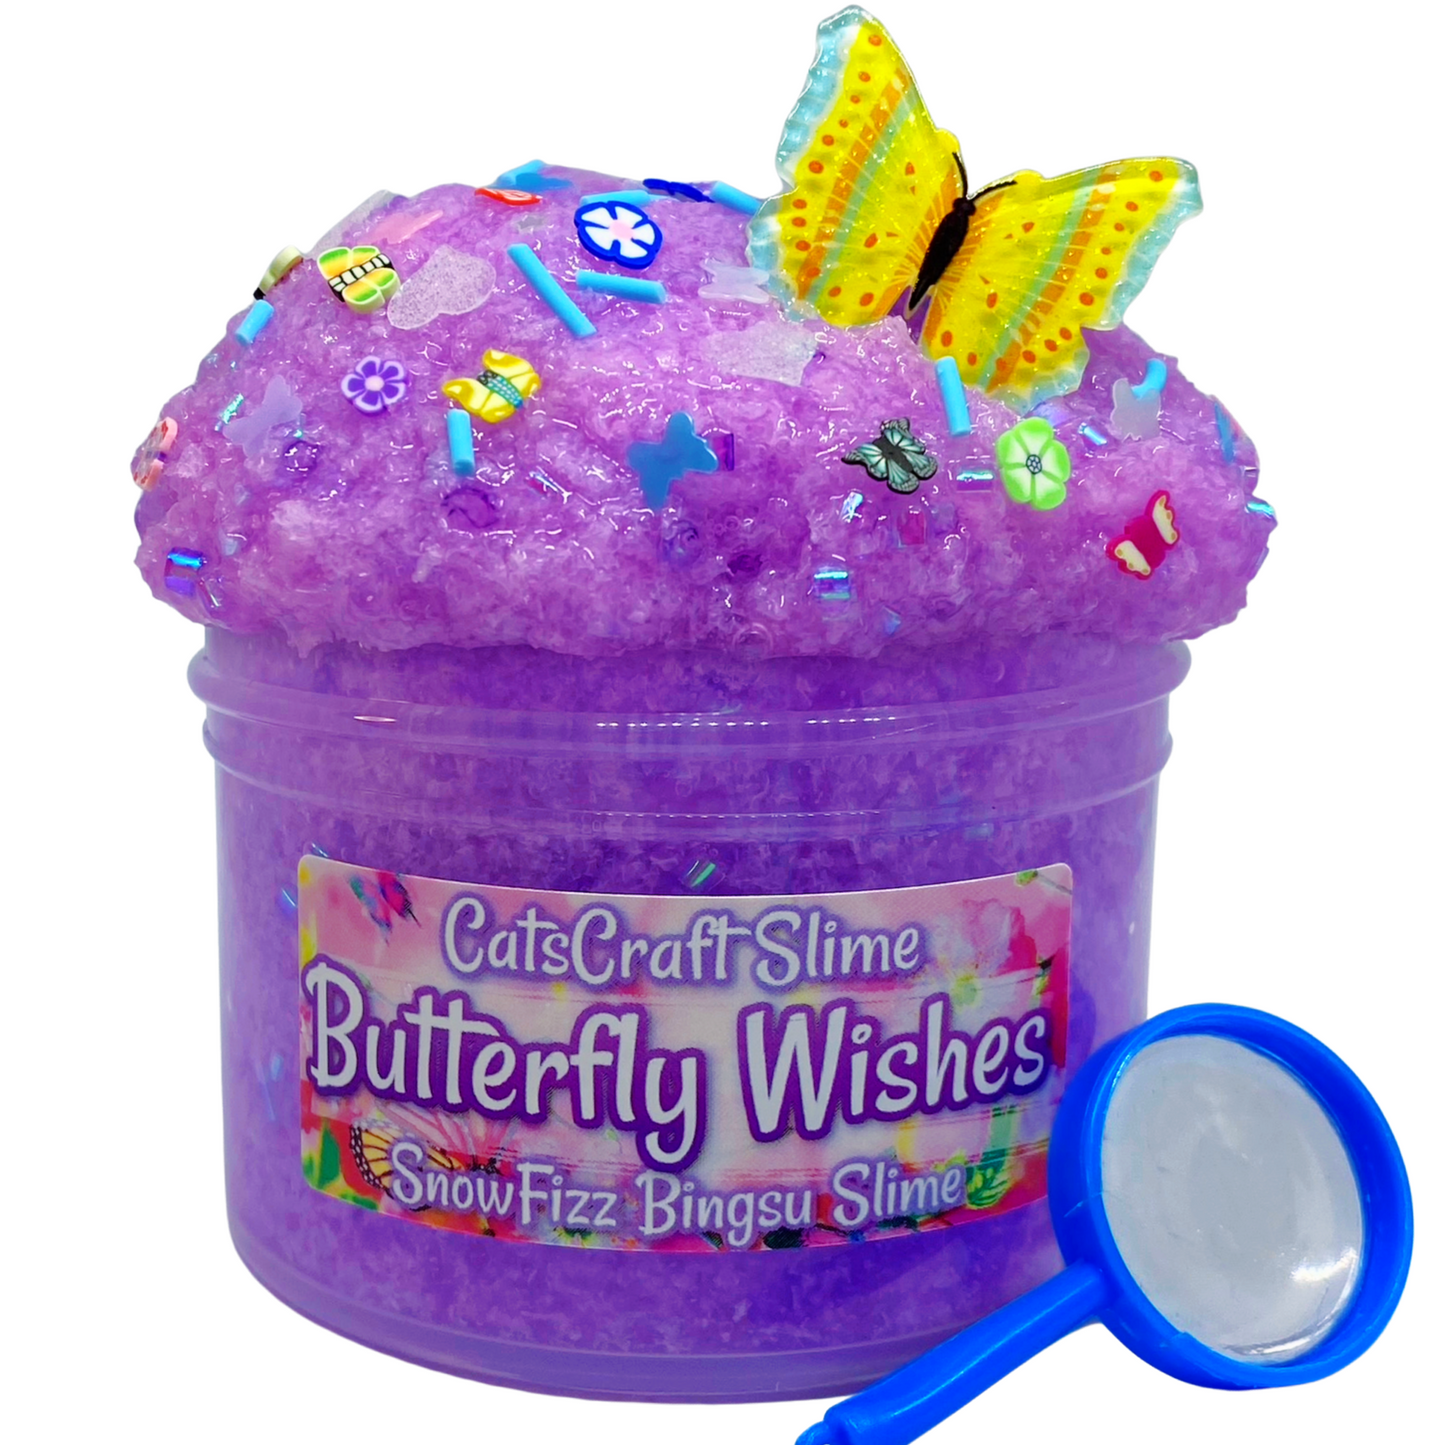 Snow Fizz Bingsu "Butterfly Wishes" Scented crunchy Slime ASMR with Charms